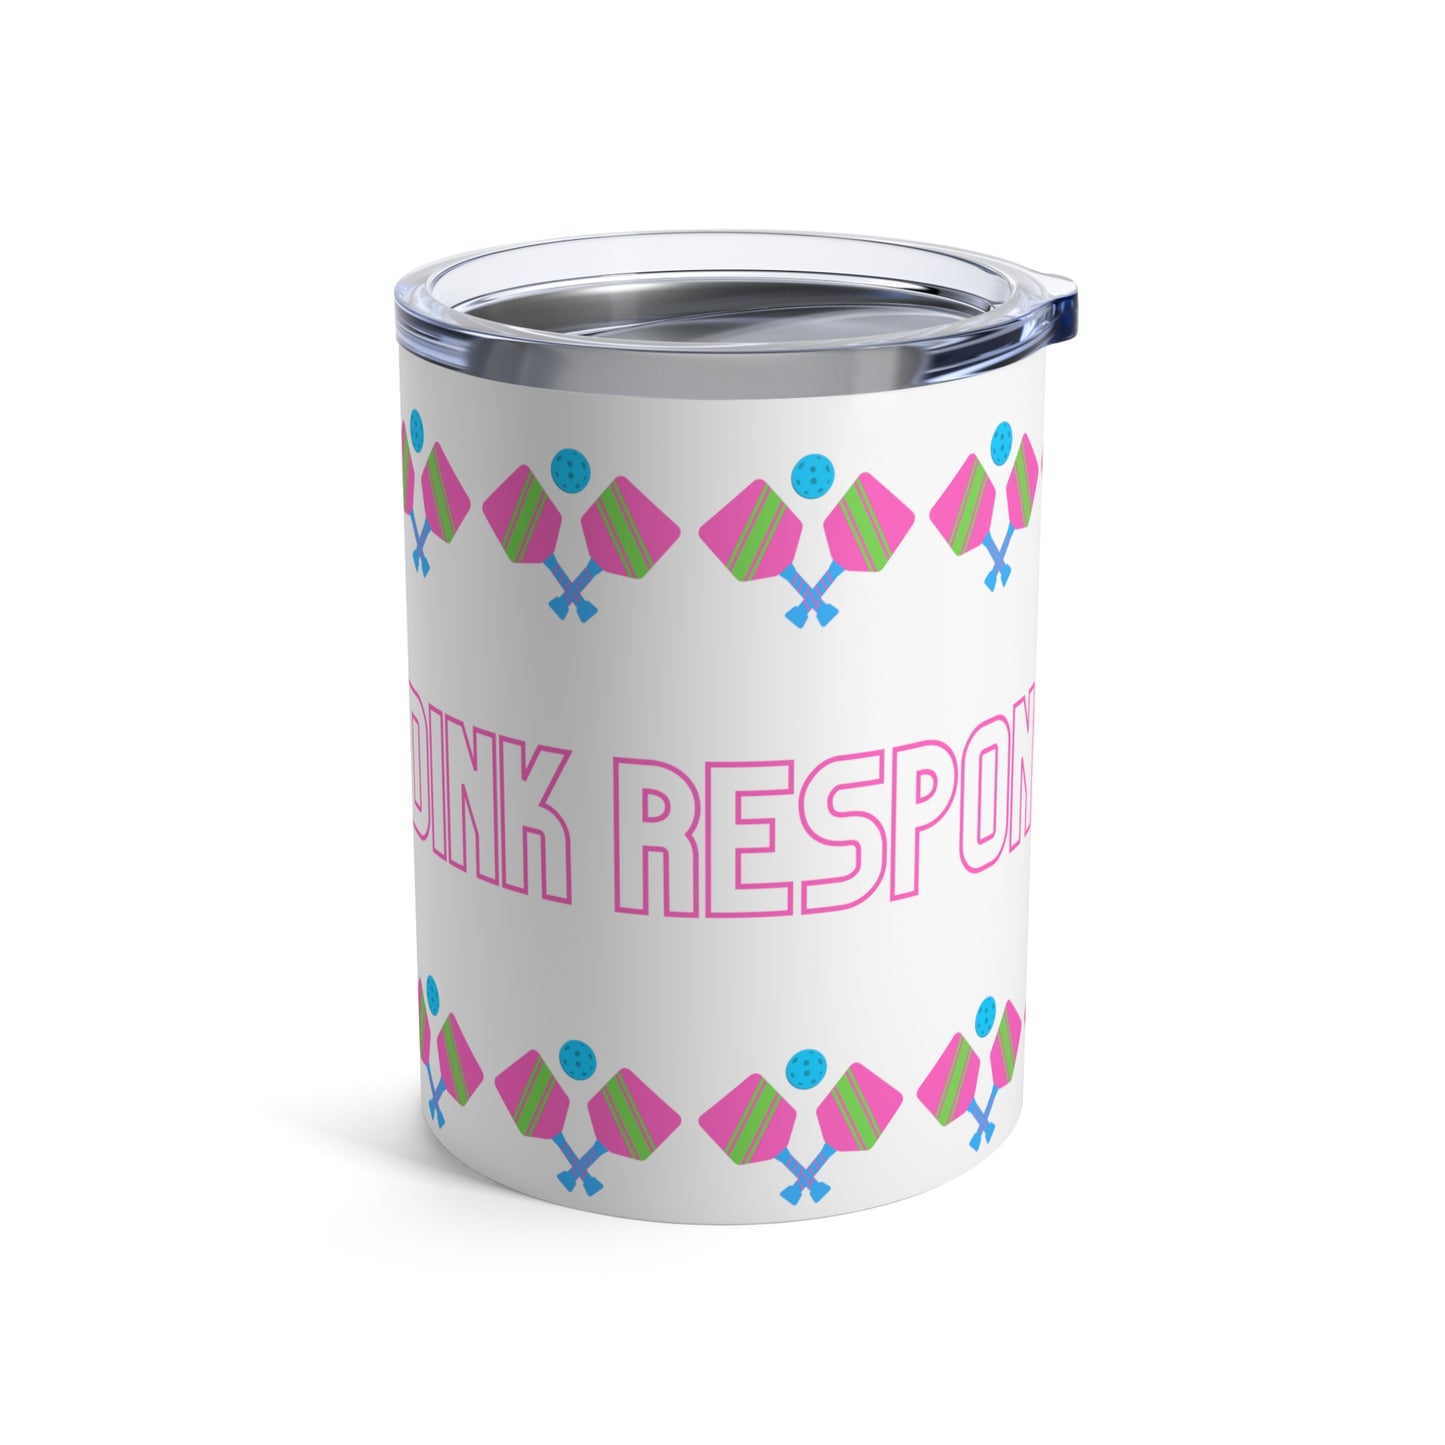 Dink Responsibly 10oz Stainless Steel Pickleball Tumbler - Stylish and Durable Travel Companion